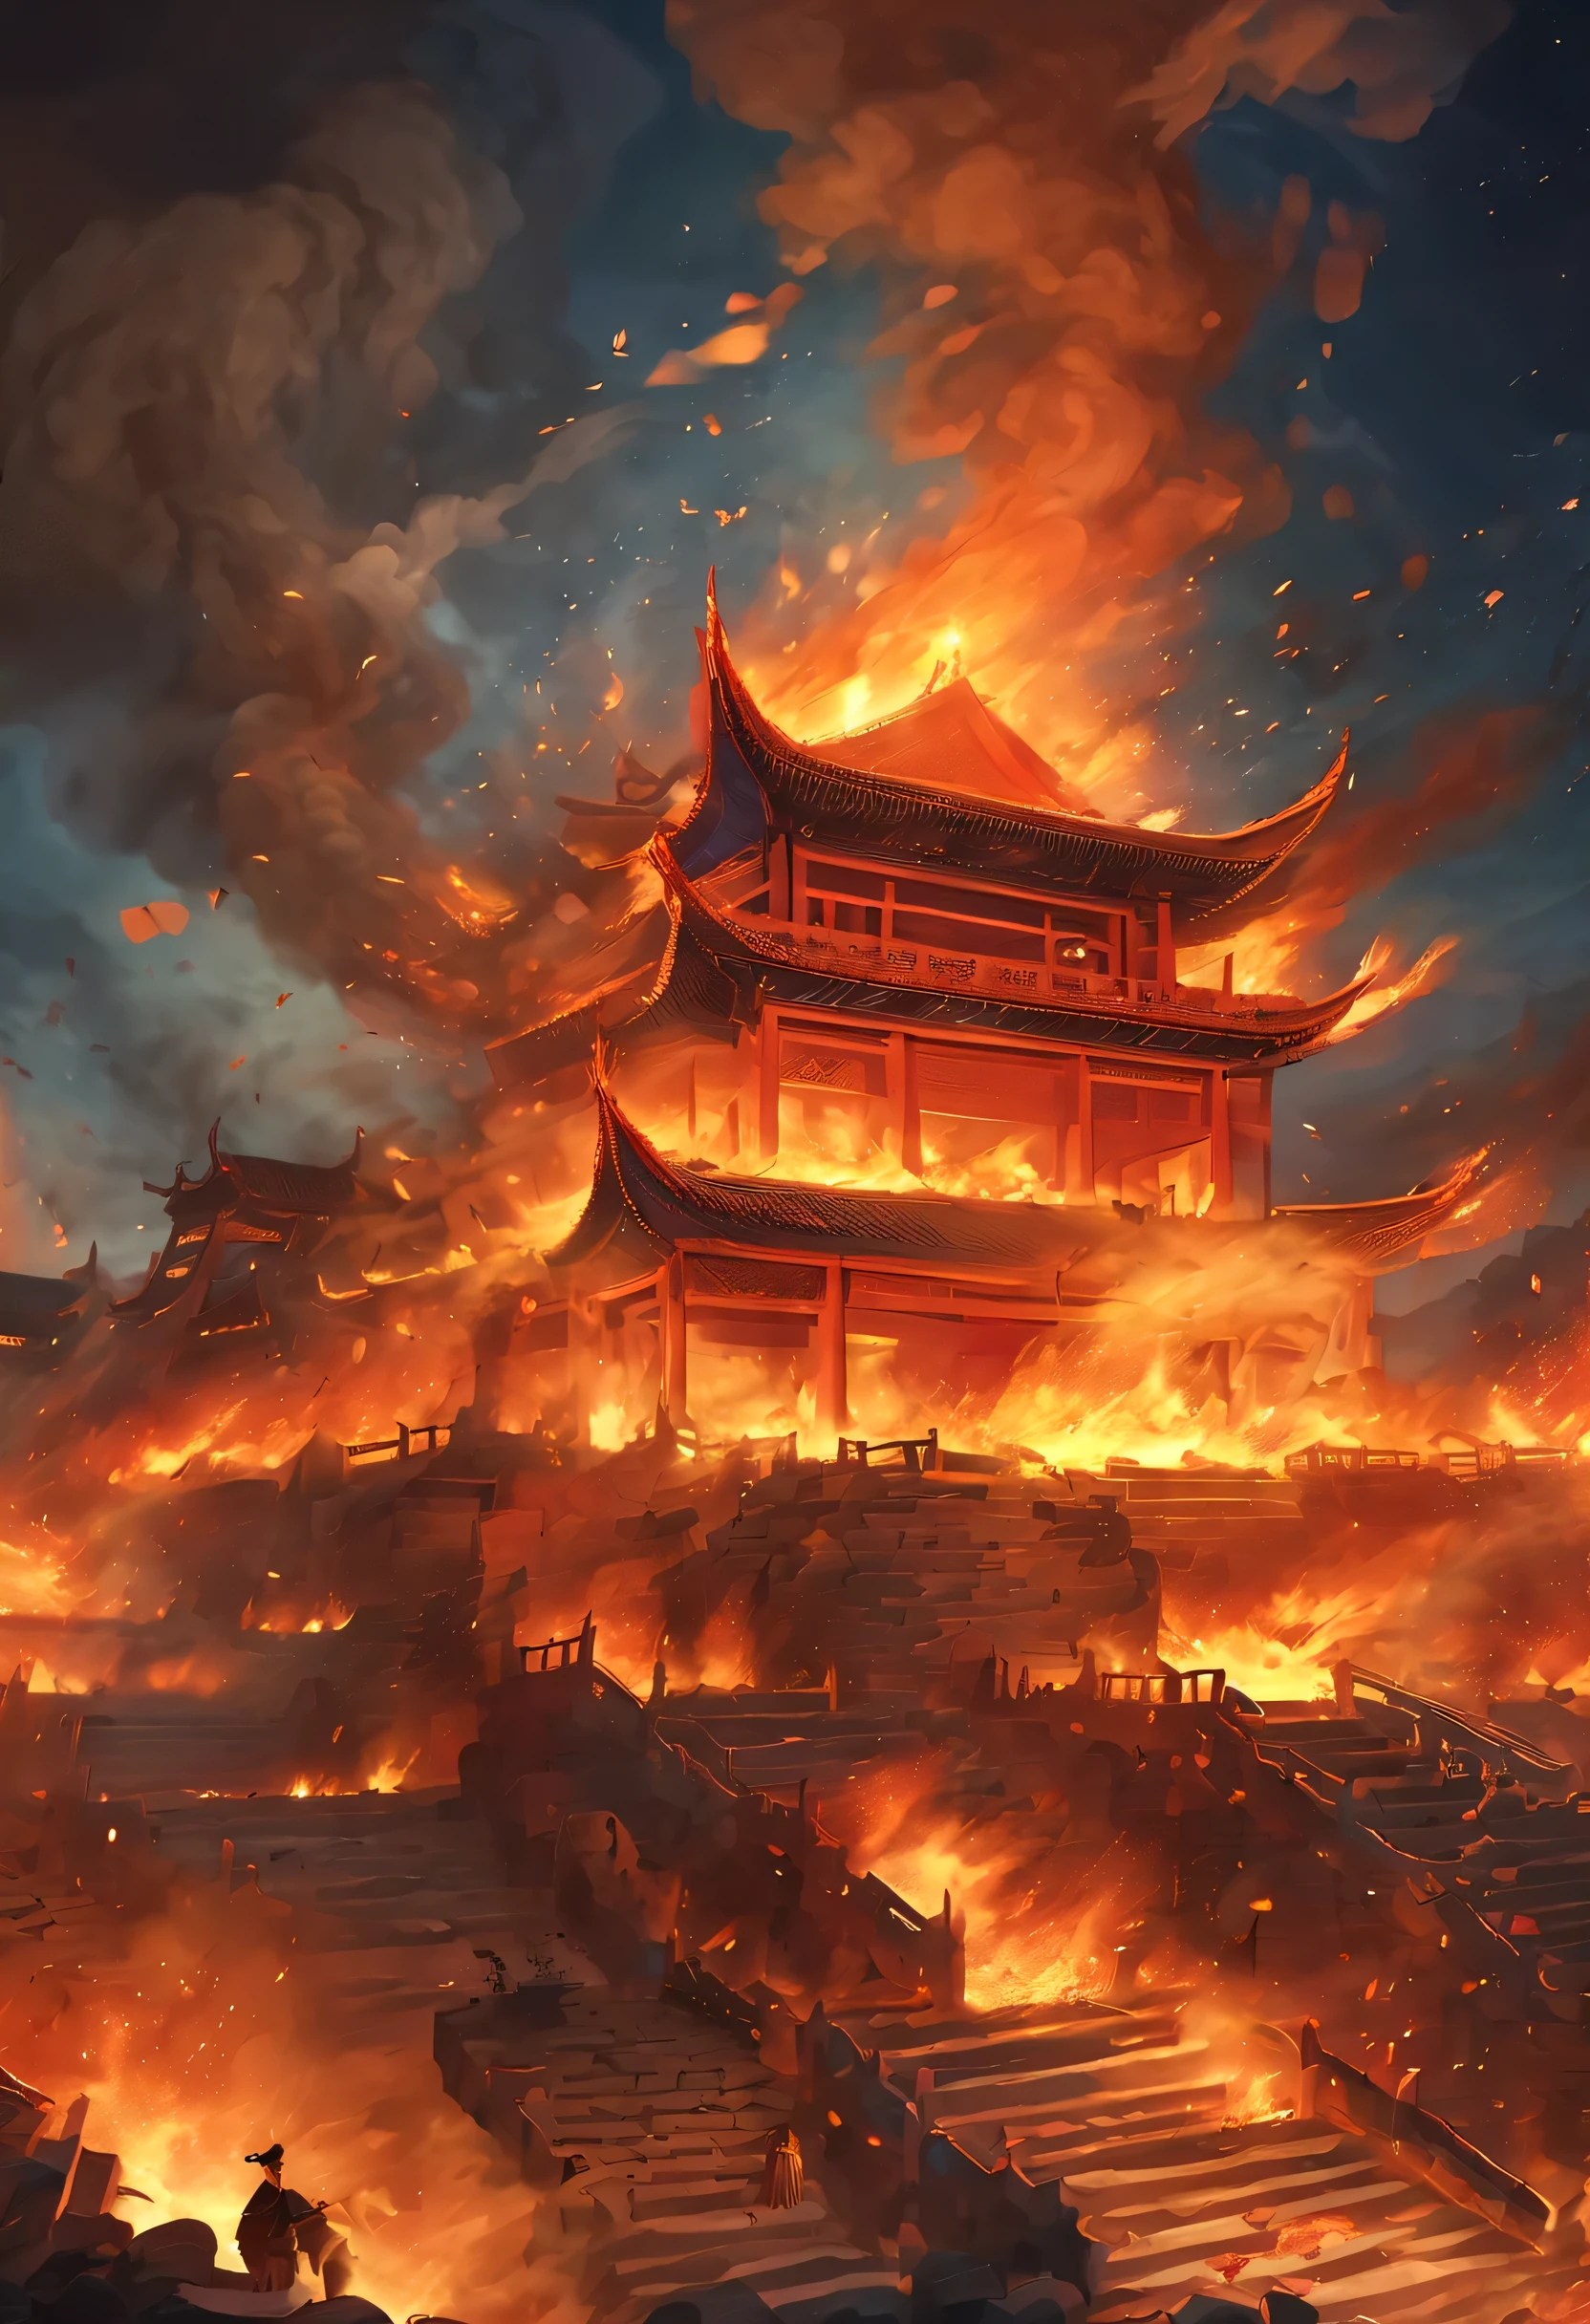 night sky，night，fire，fire海，烈fire，Burning ancient Chinese buildings，capital city，ancient city，collapse，ruins，（汉服红衣女子奔向fire中），explode，burst，ethnic style，Chinese elements，